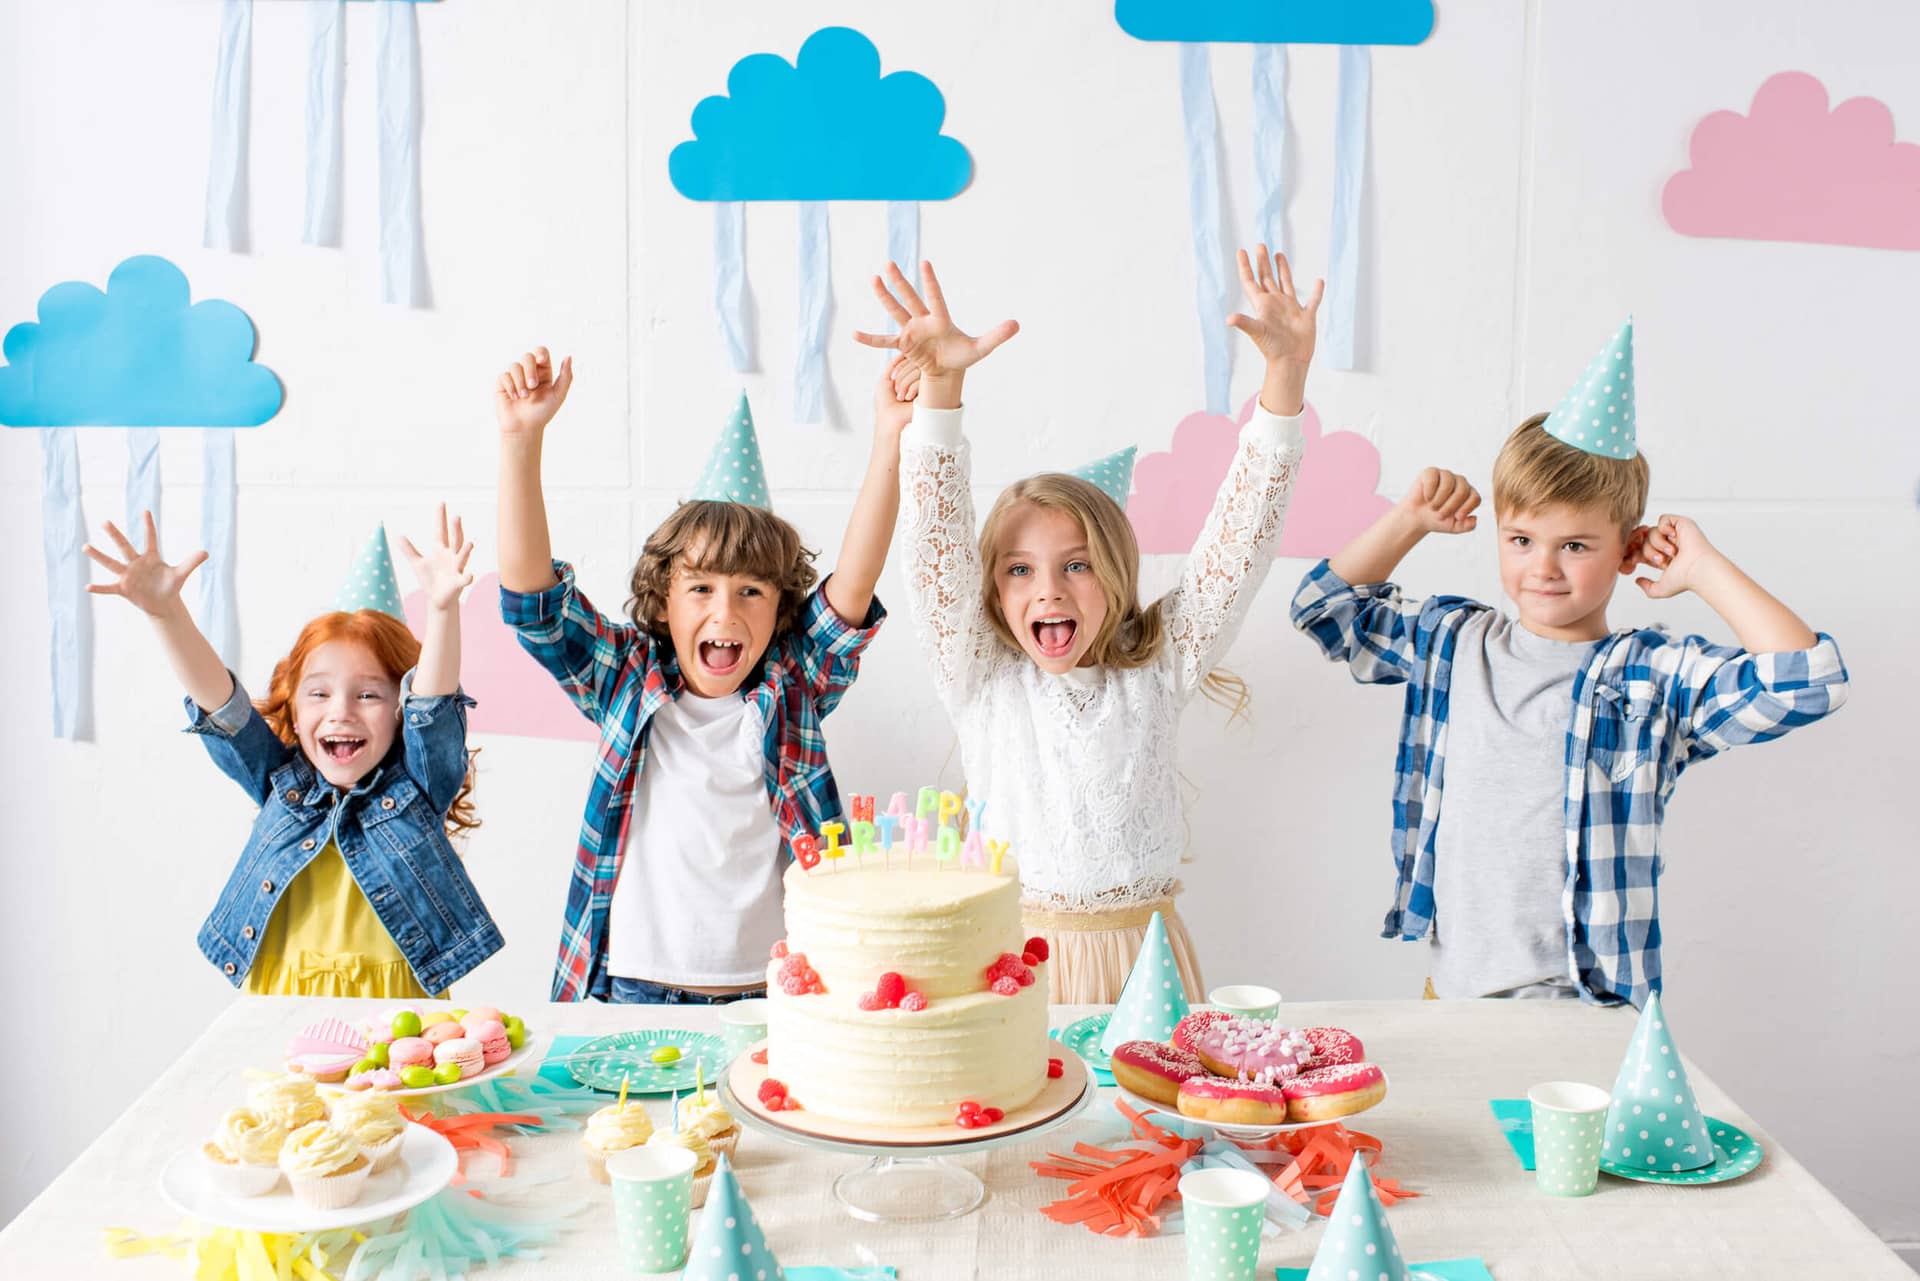 Tips for a Classy Birthday Party Event